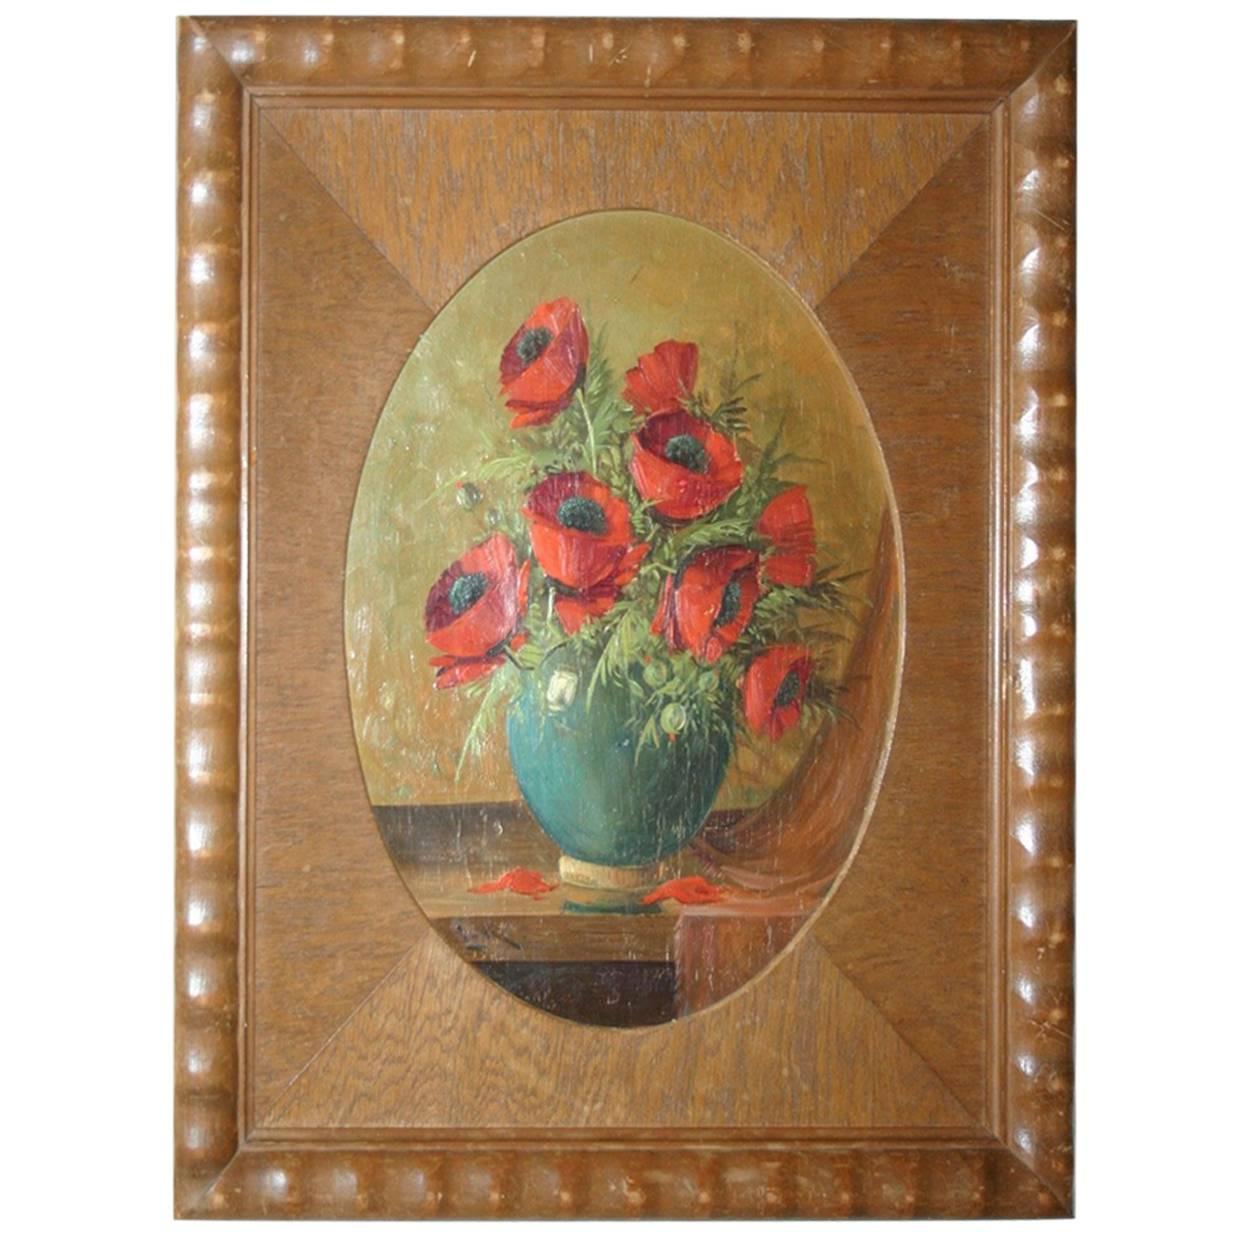 1920s Painting on Wood Poppy Bouquet in Vase in Art Deco Passe Partout Frame